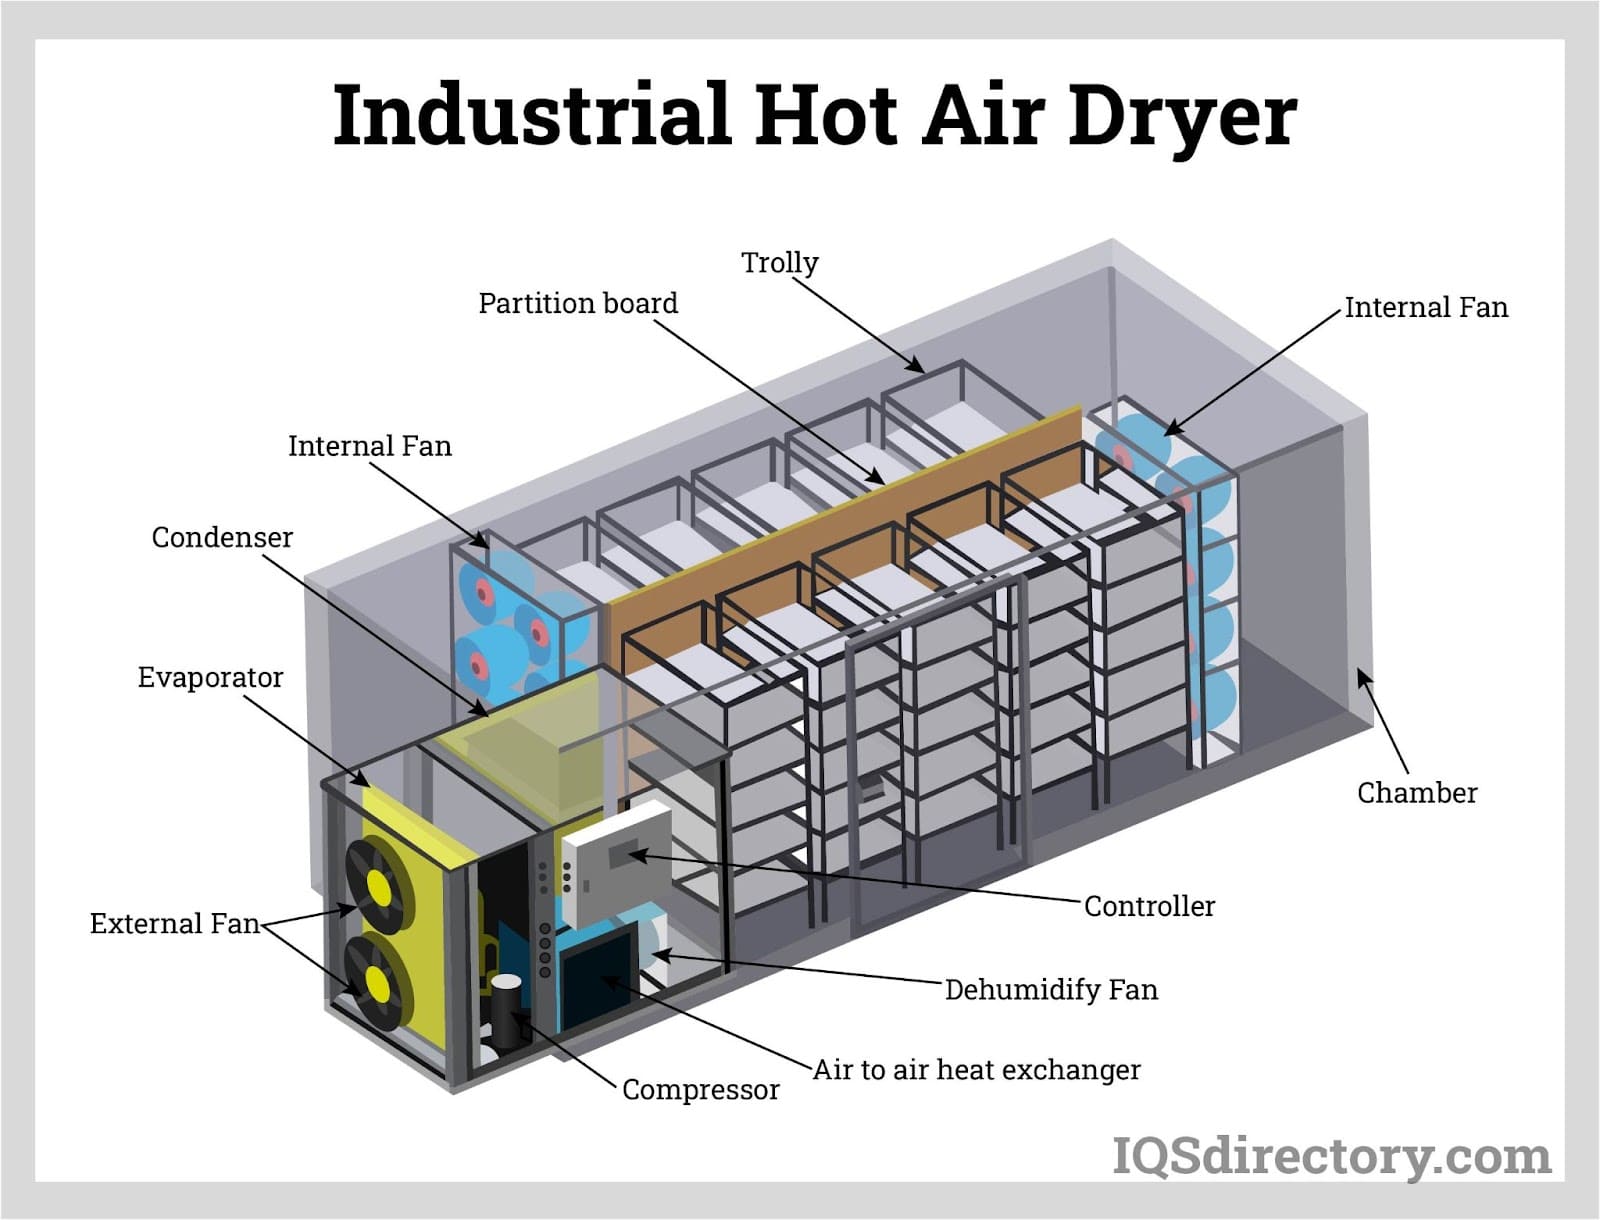 https://www.iqsdirectory.com/articles/dryer/types-of-dryers/industrial-hot-air-dryer.jpg